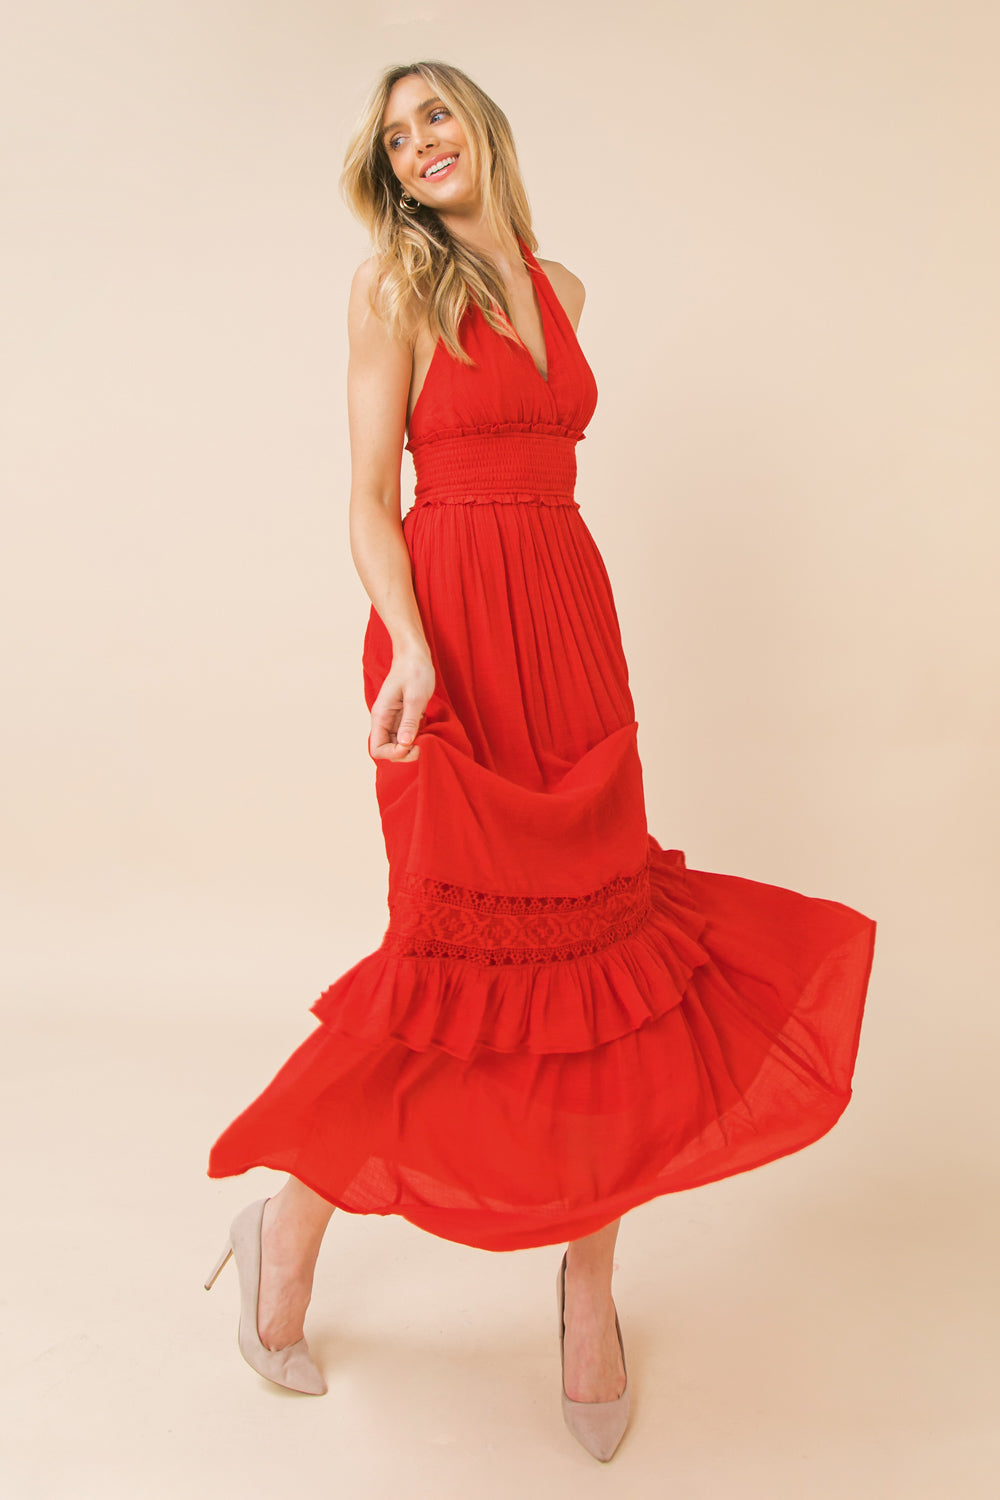 ARRIVAL TIME WOVEN MAXI DRESS